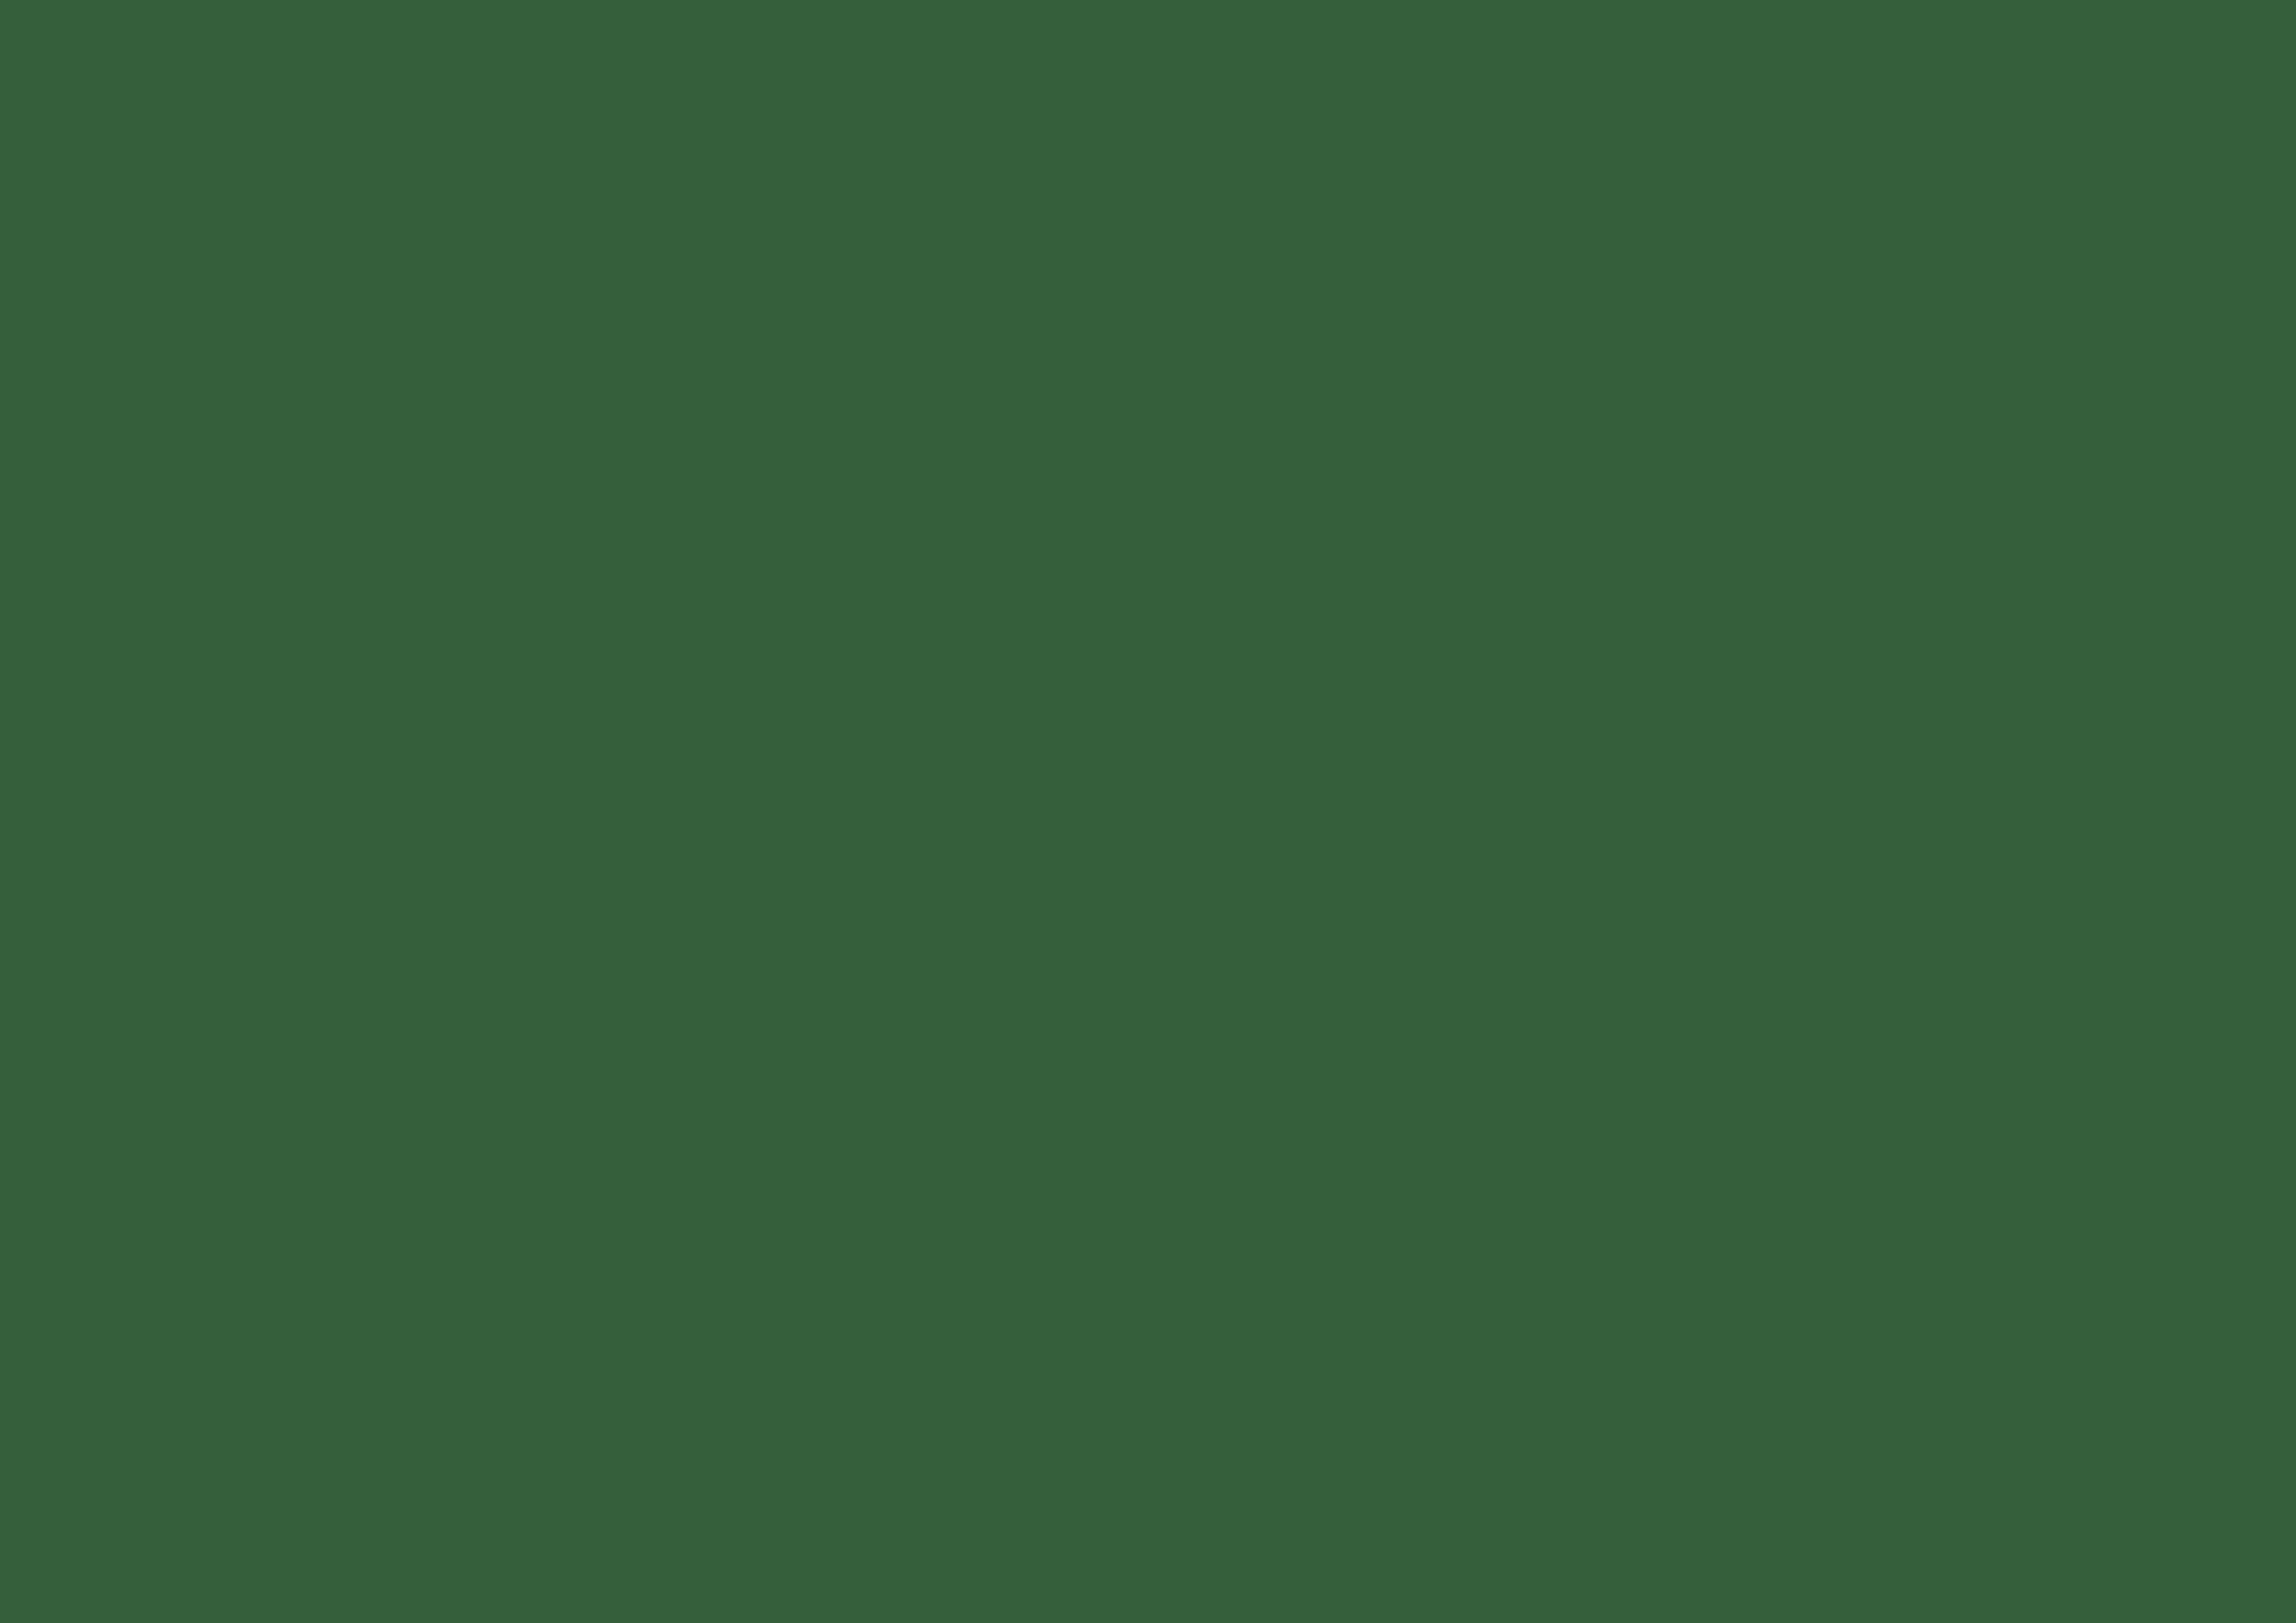 3508x2480 Hunter Green Solid Color Background